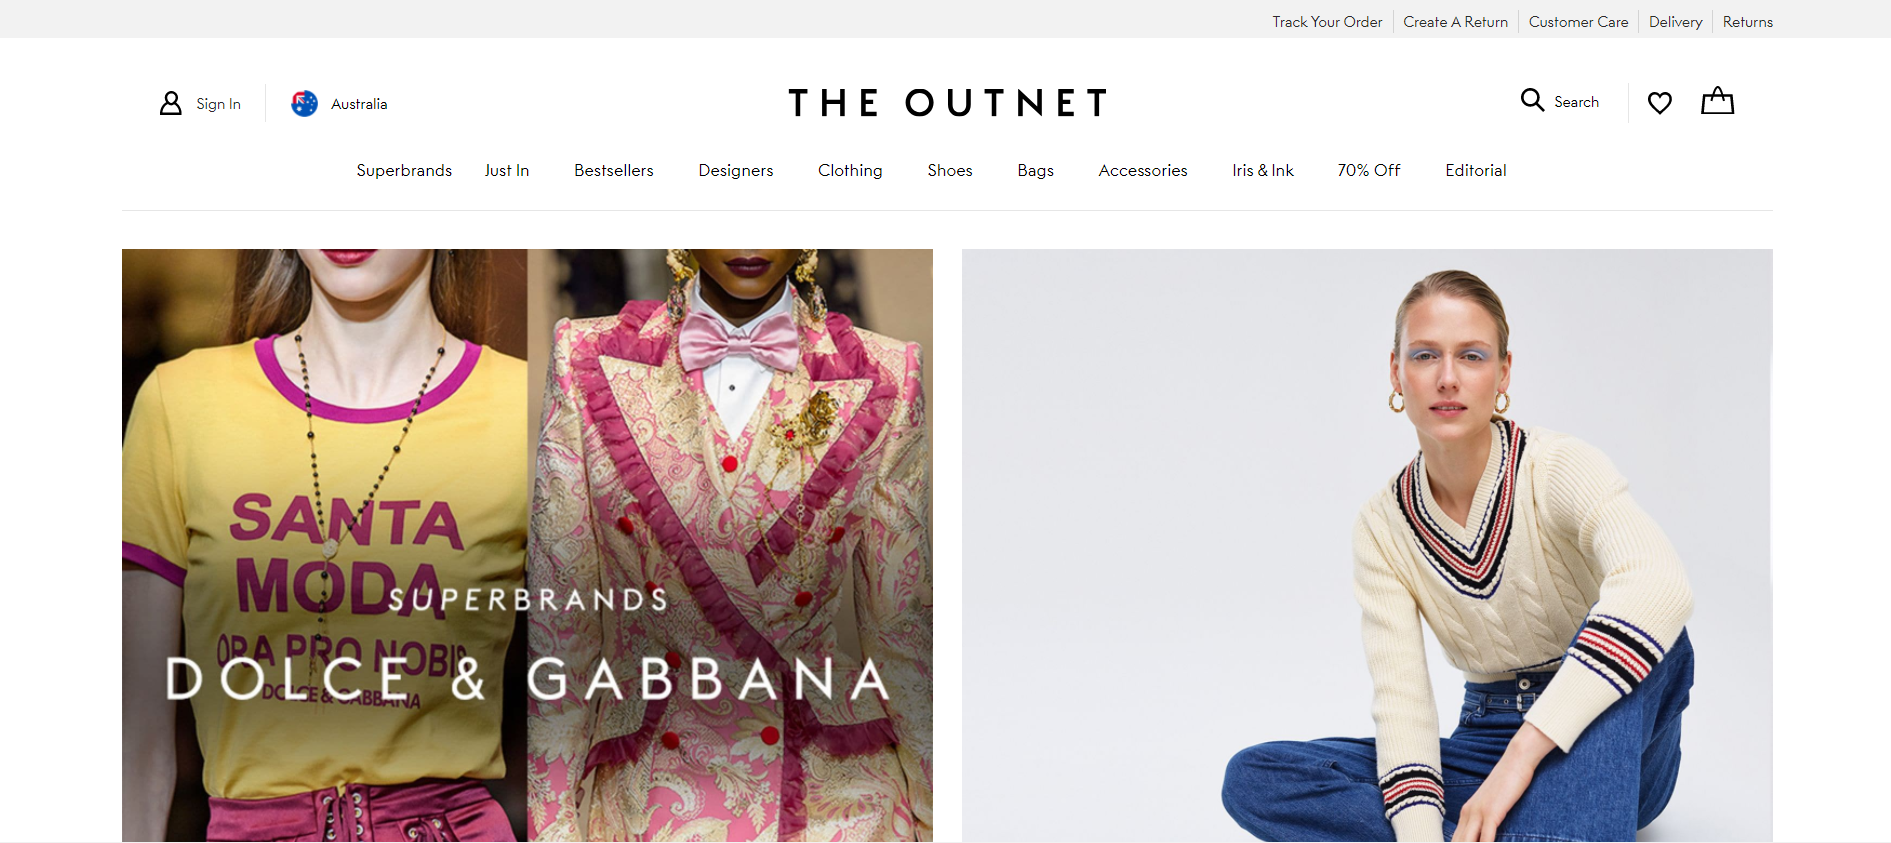 The 8 Best Luxury Fashion Websites to Shop for Designer Clothes